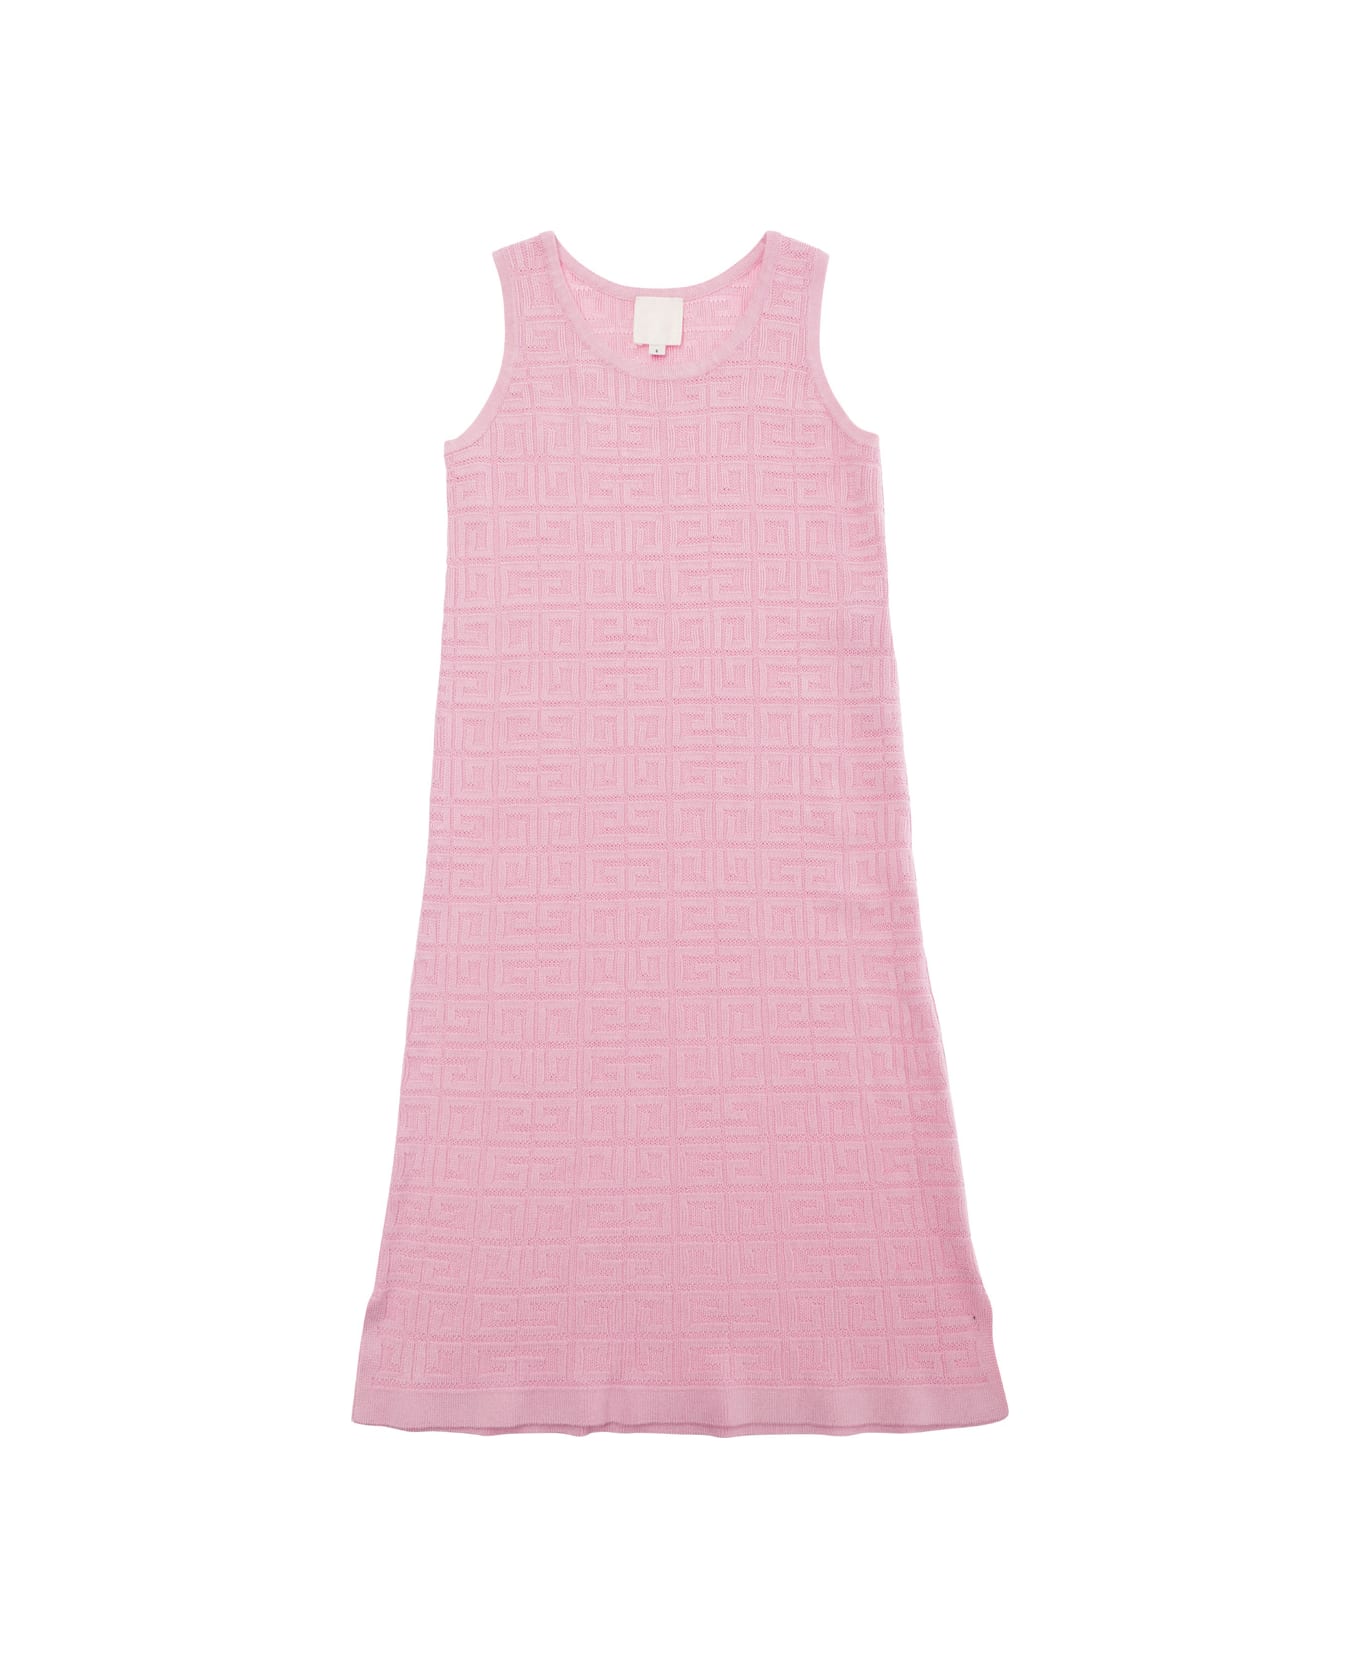 Givenchy Mini Pink Dress With All-over Gg Motif In Viscose Blend Girl - Pink